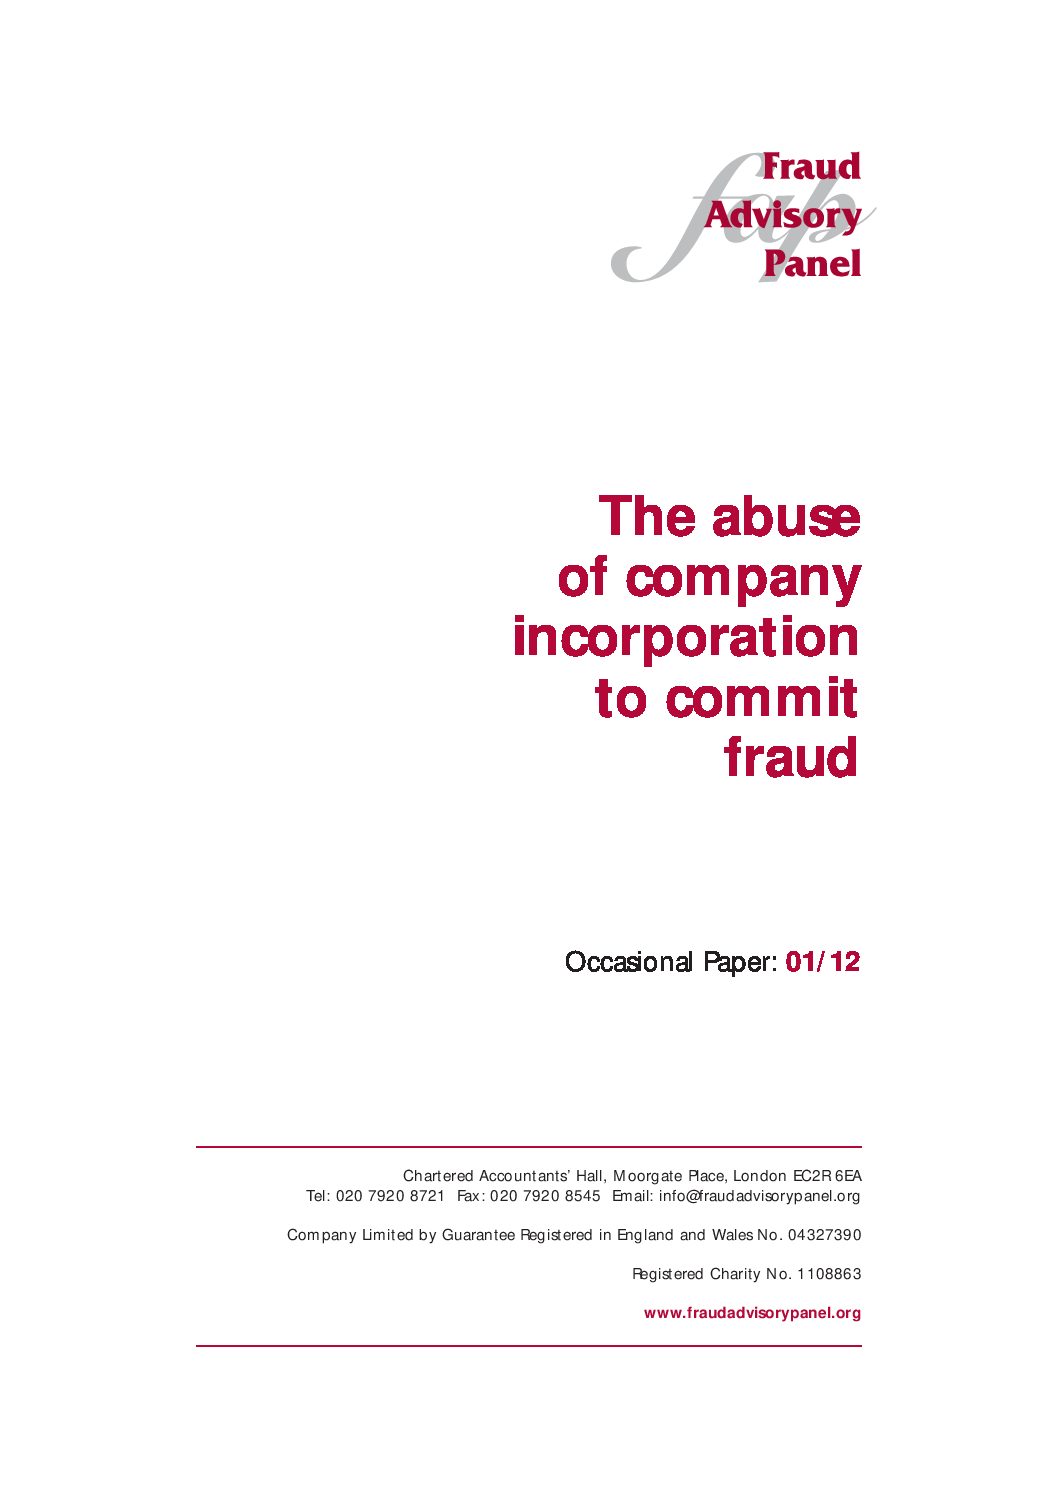 Abuse of company incorporation Nov12 document cover